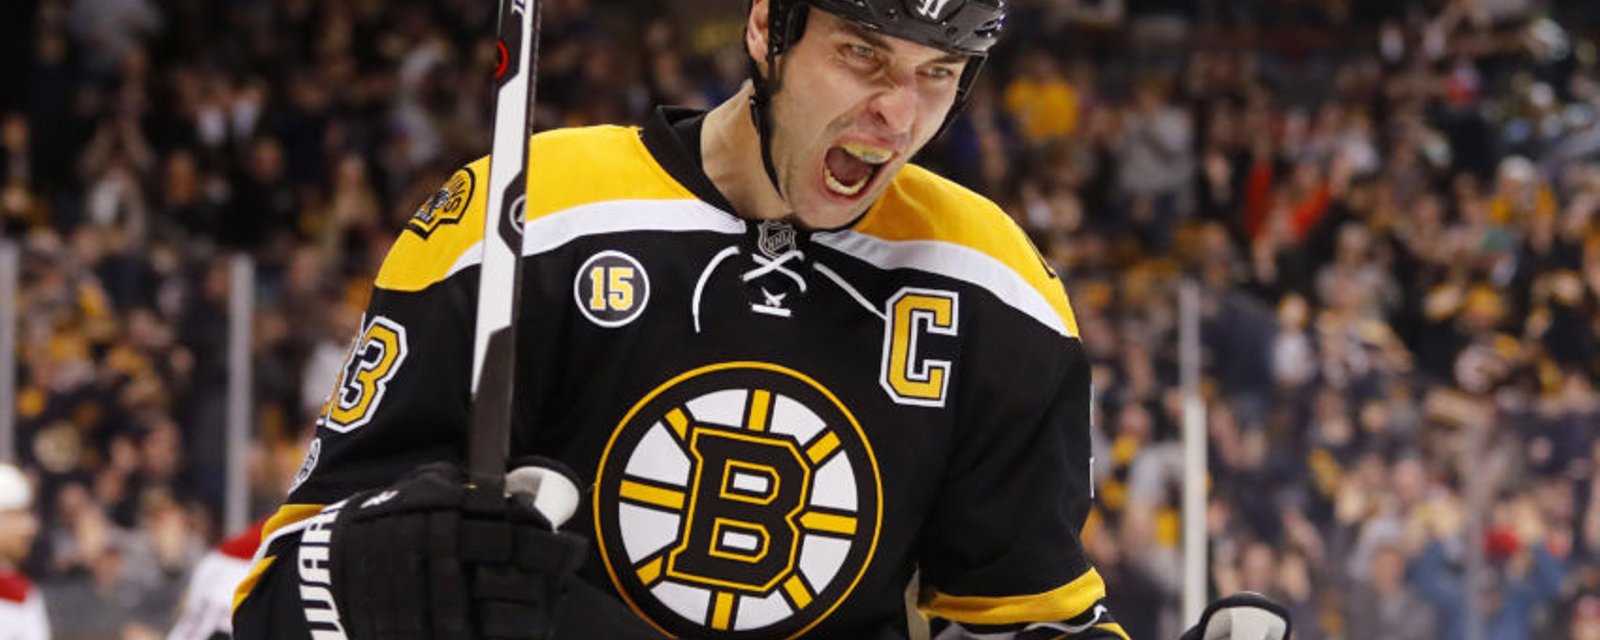 Chara makes awesome statement about being the oldest in the NHL! 